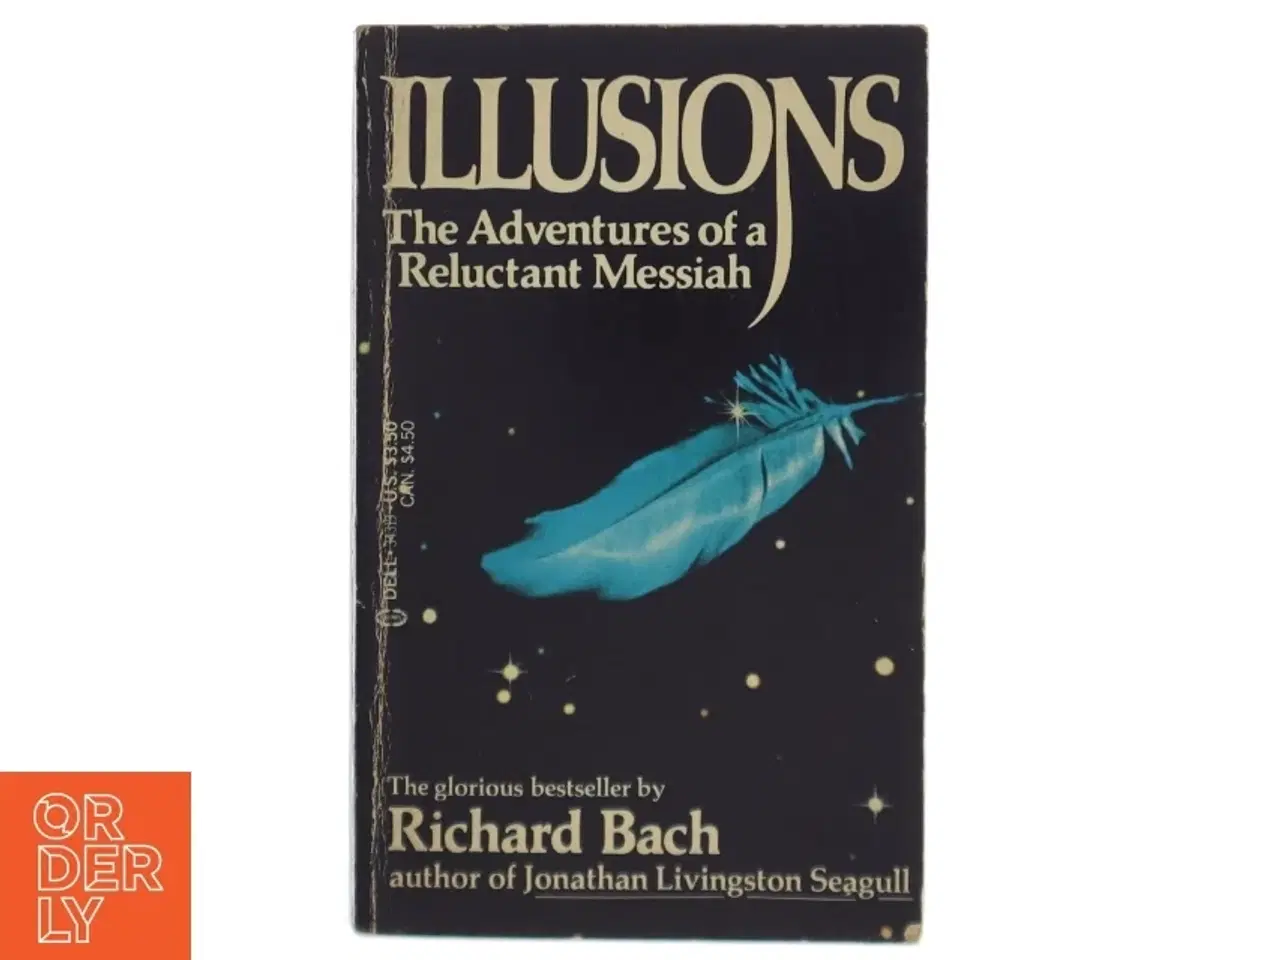 Billede 1 - Illusions: The Adventures of a Reluctant Messiah af Richard Bach